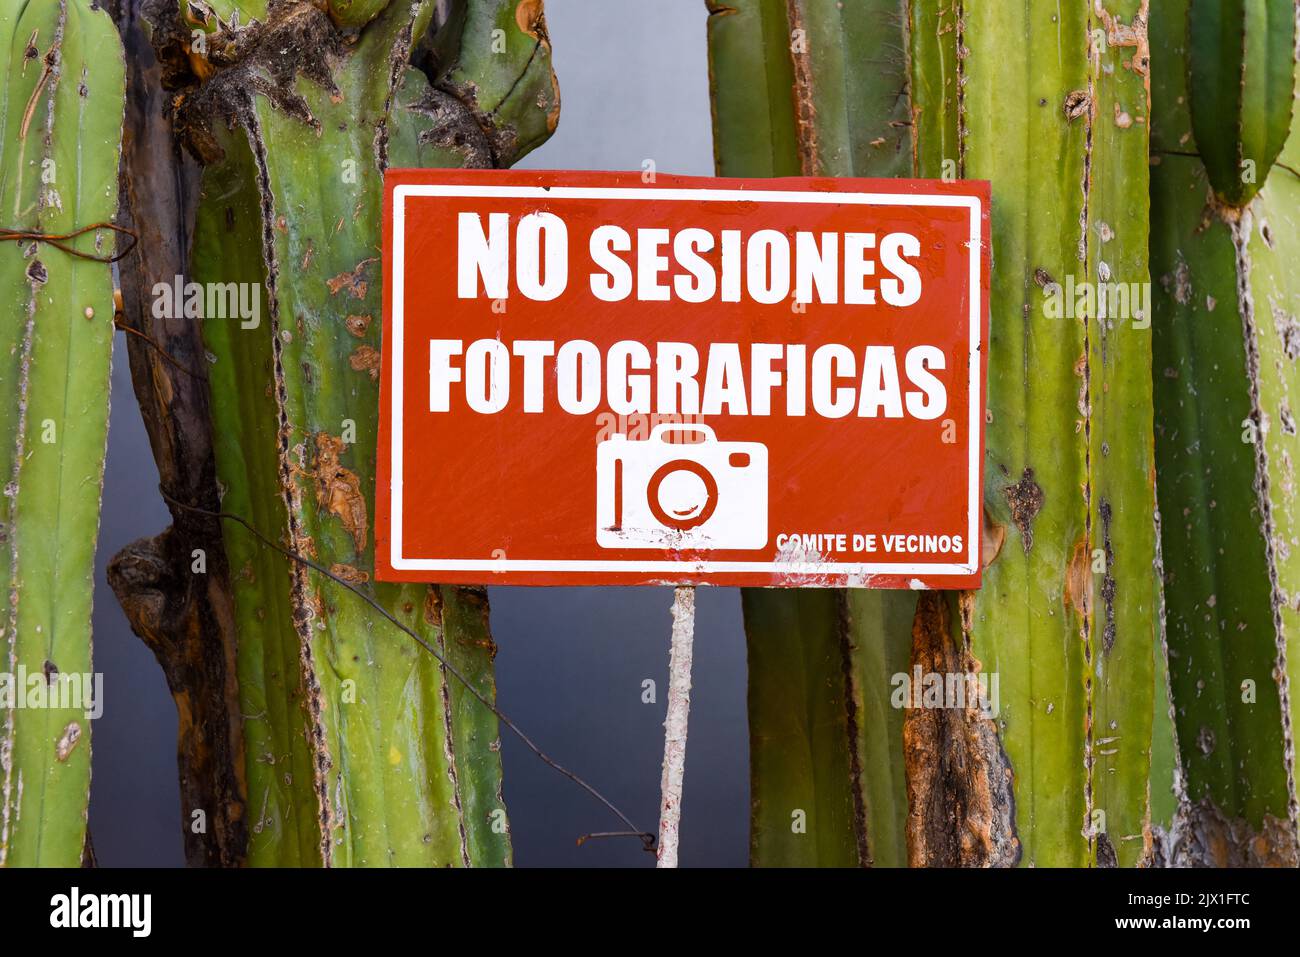 Fed-up local residents put signs prohibiting photo sessions in some alleys of the historical center of Oaxaca de Juarez, Mexico Stock Photo